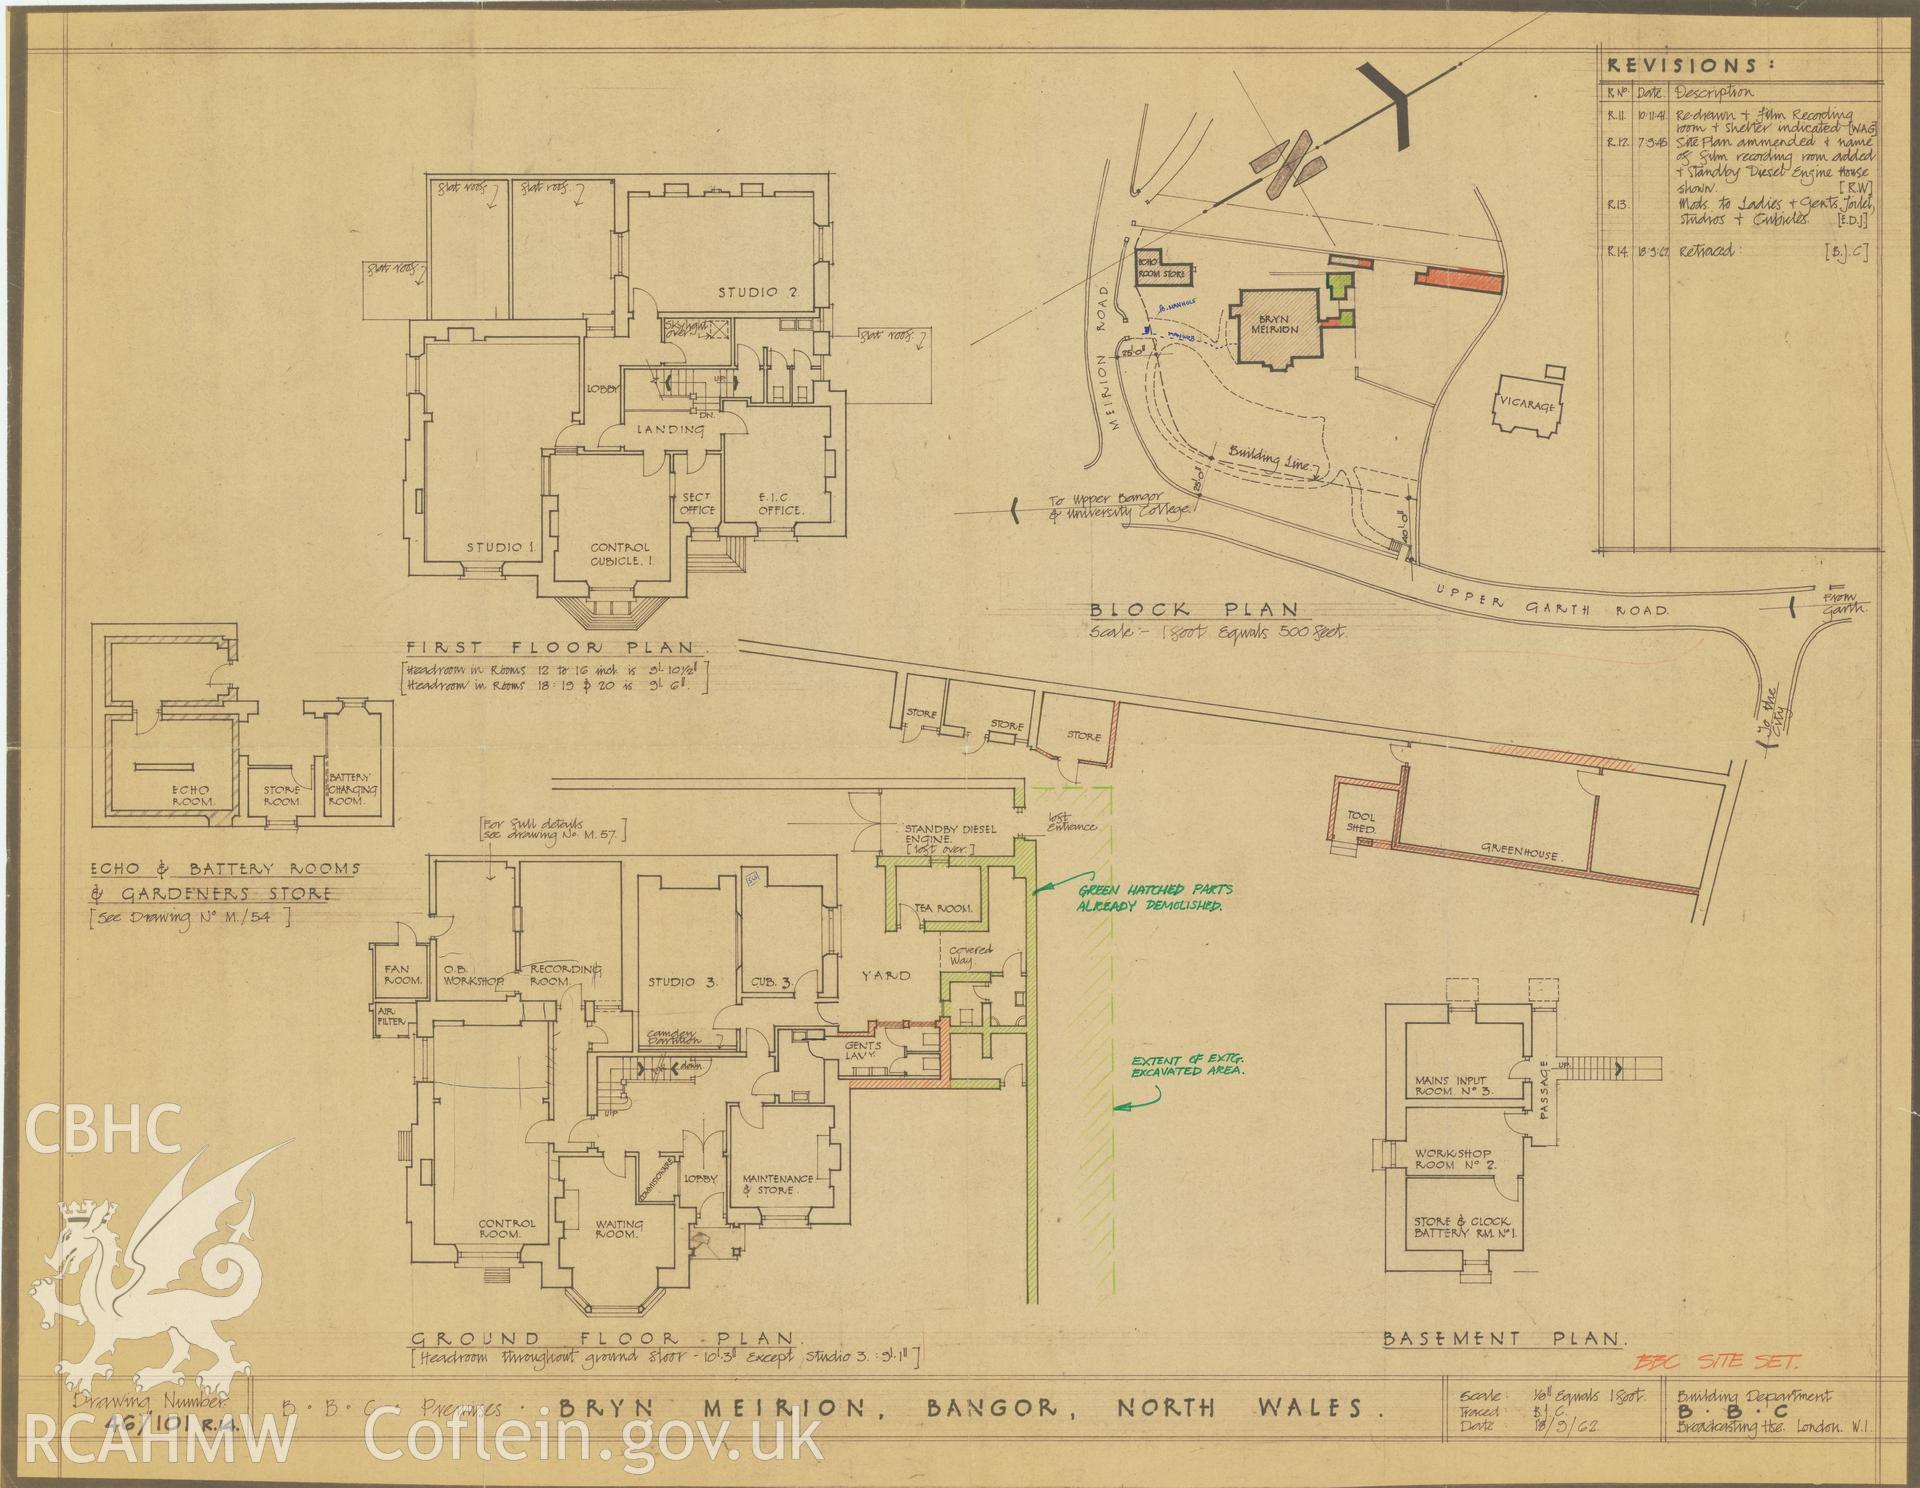 BBC premises, Broadcasting House, Bangor - block plan drawing of Bryn Meirion. Drawing No. 46/101 R14. September 1962.